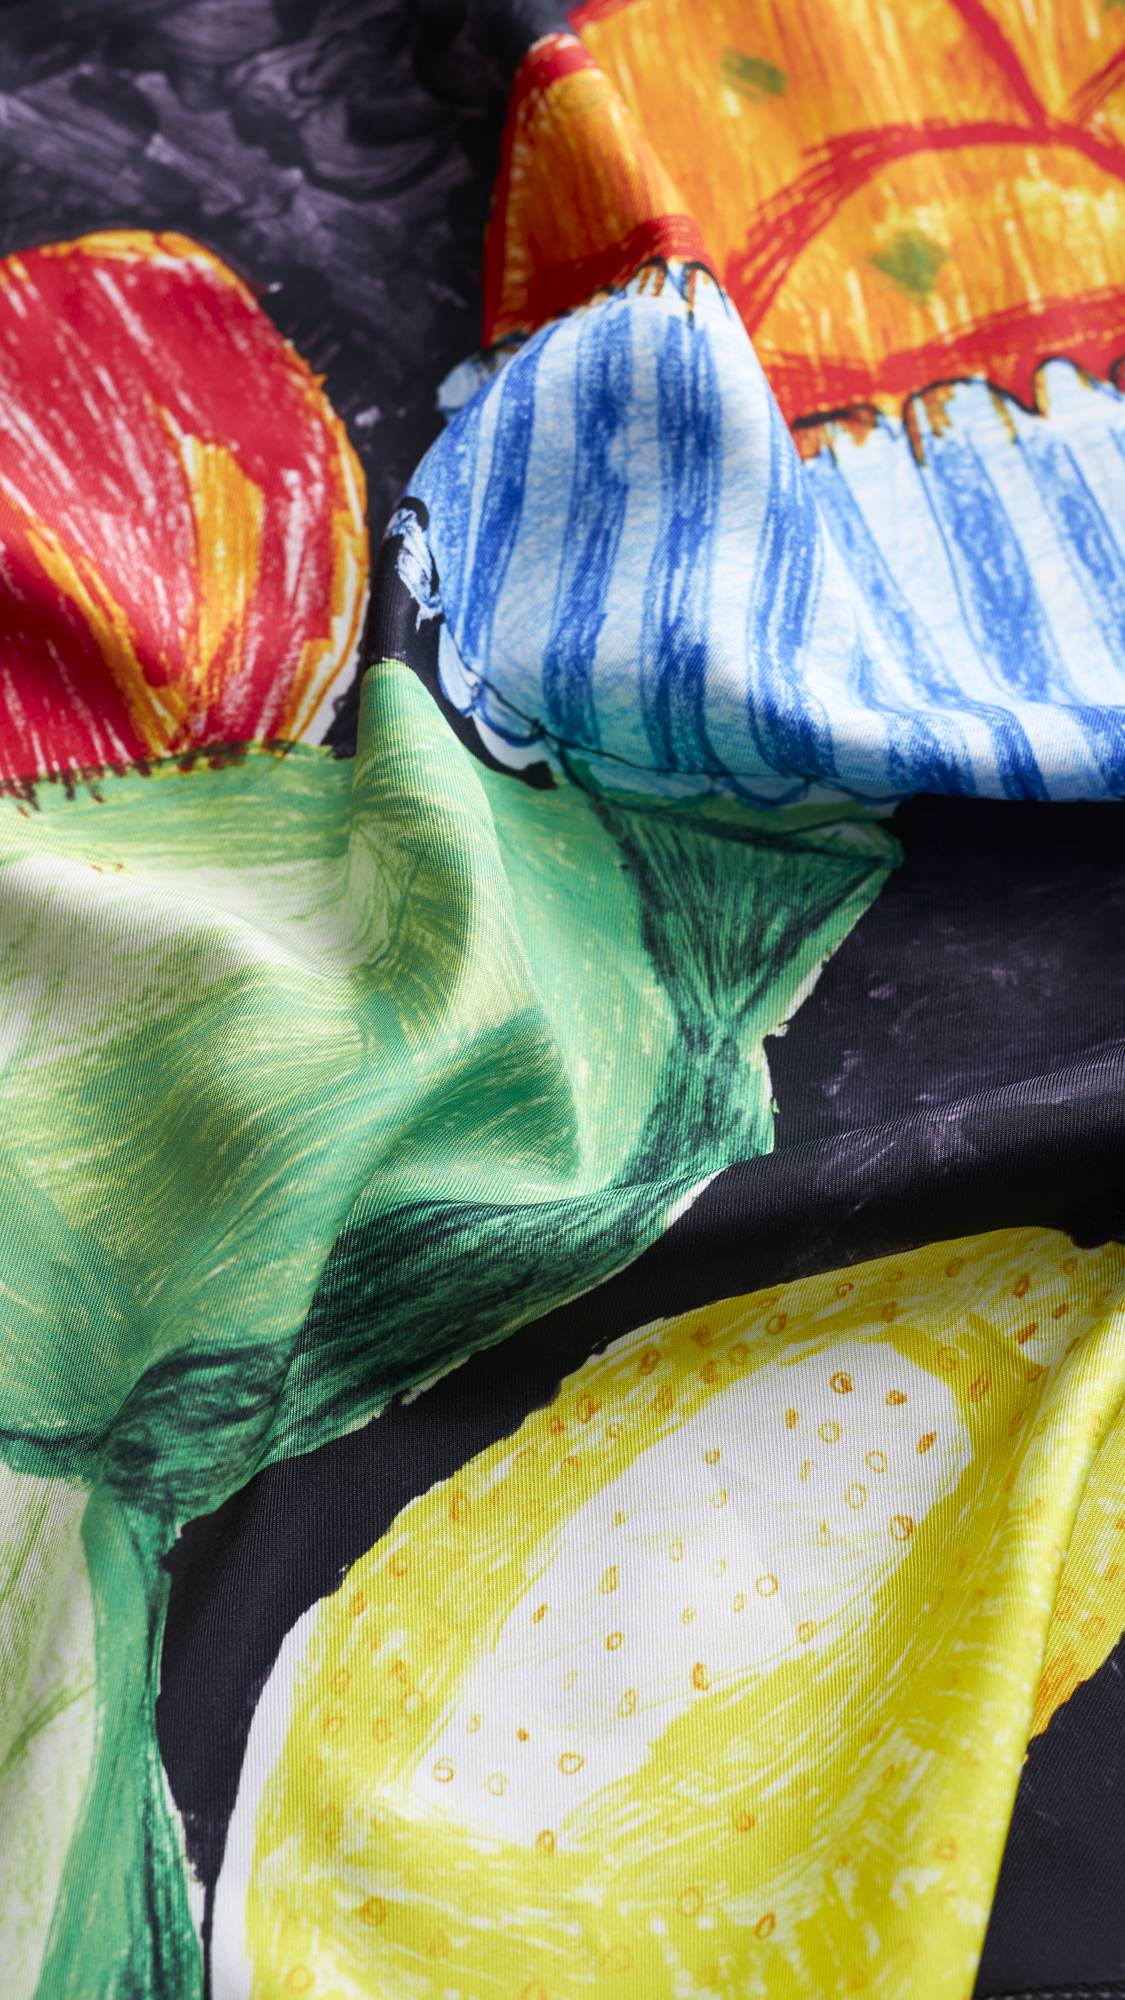 The image shows a close-up of the Fruit Fest knot wrap focusing on the folds and sheen of the fabric. 